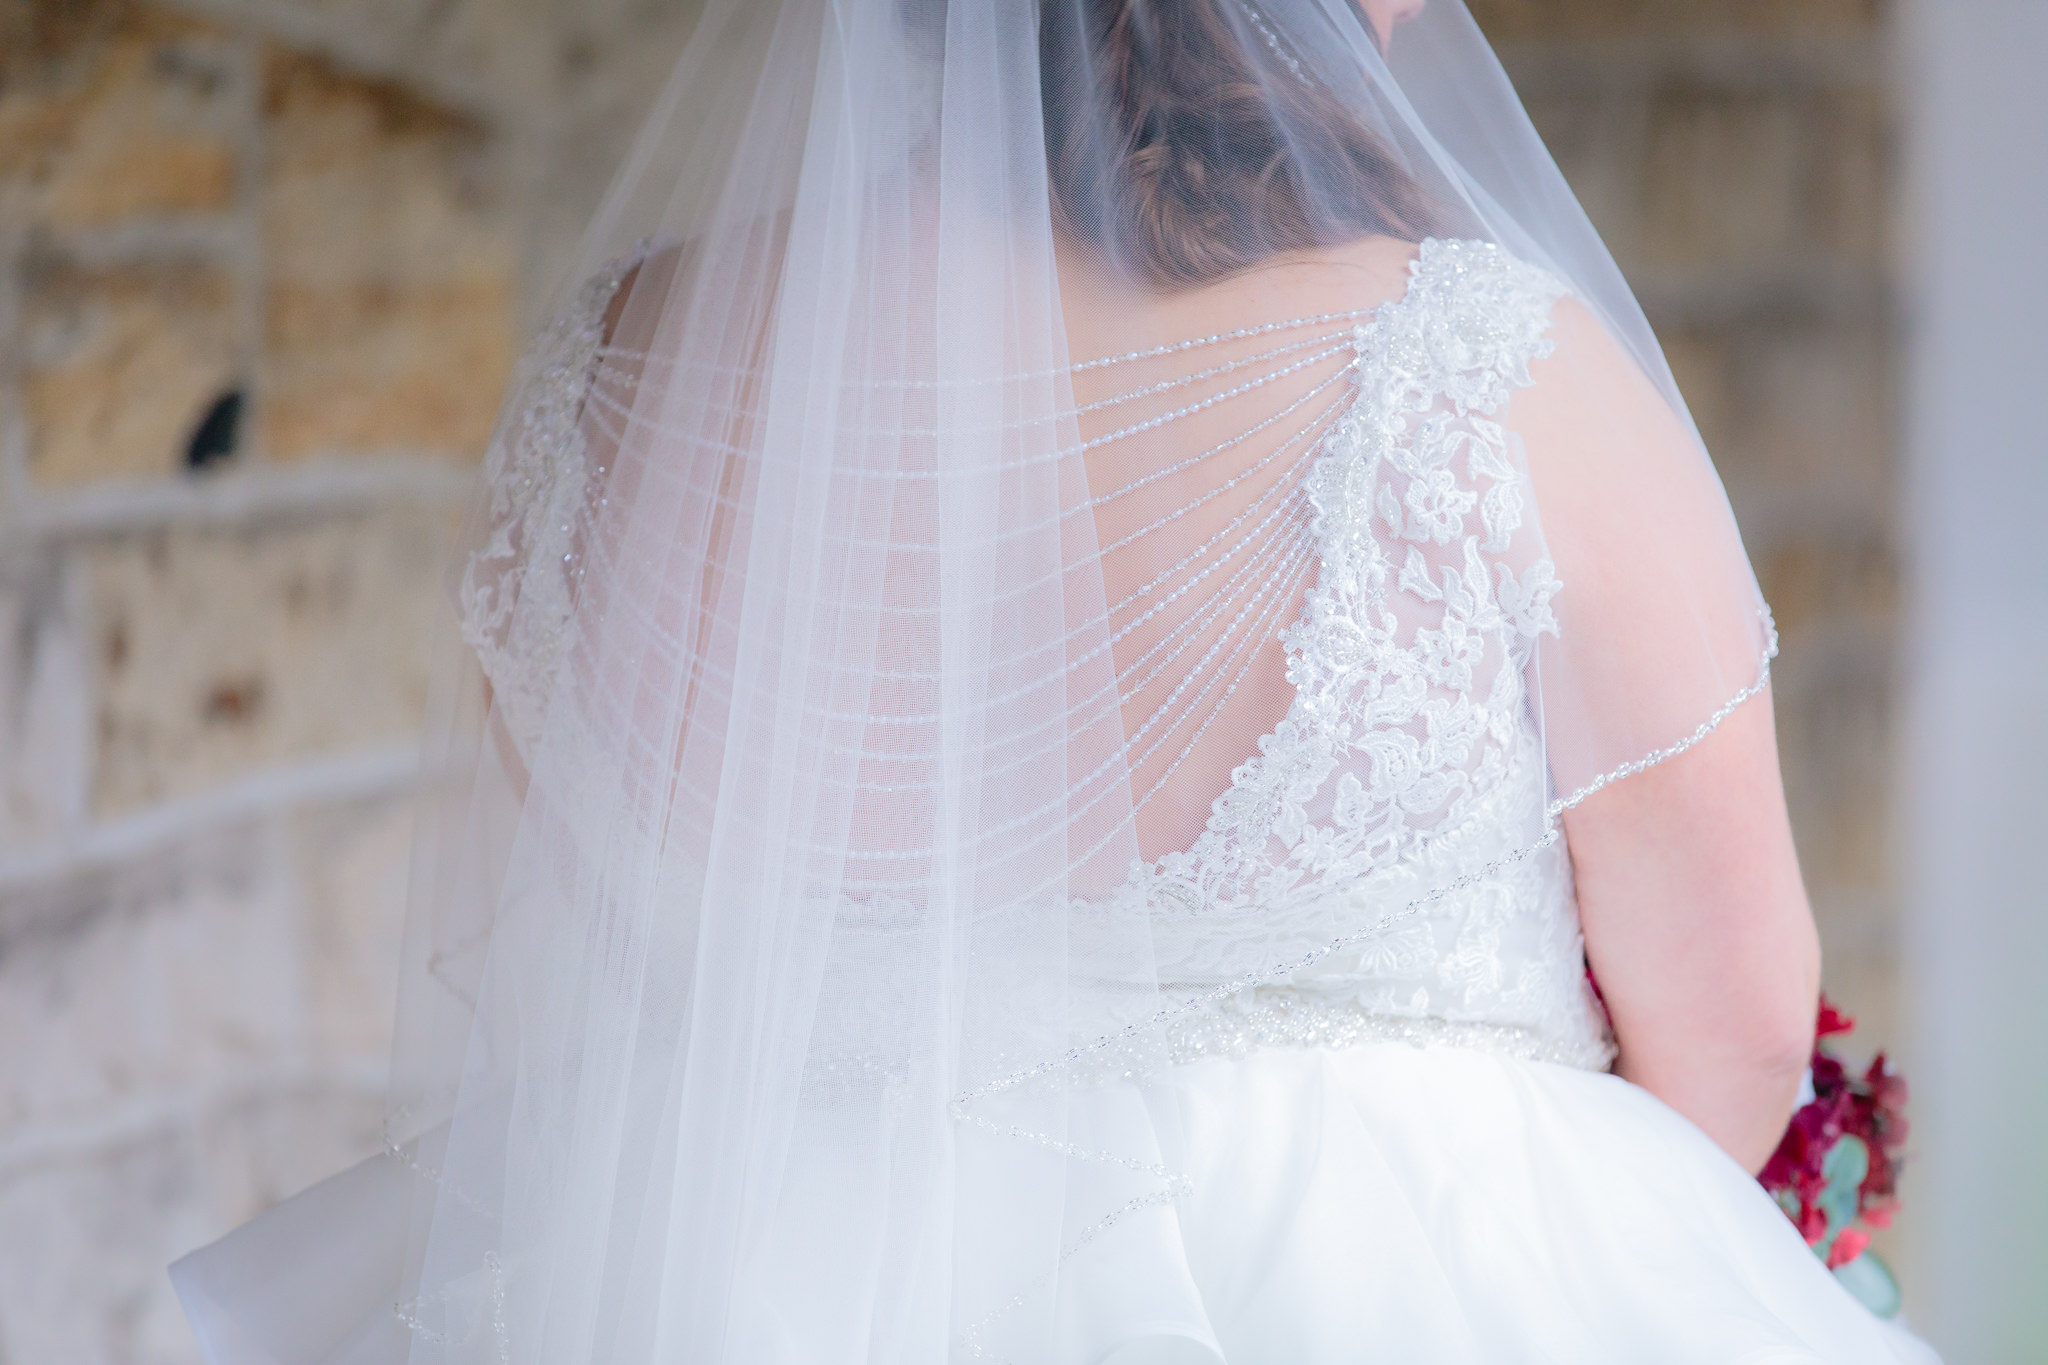 Beaded detailing across the back of the bride's dress along with lace straps at Mt. Lebanon United Methodist Church